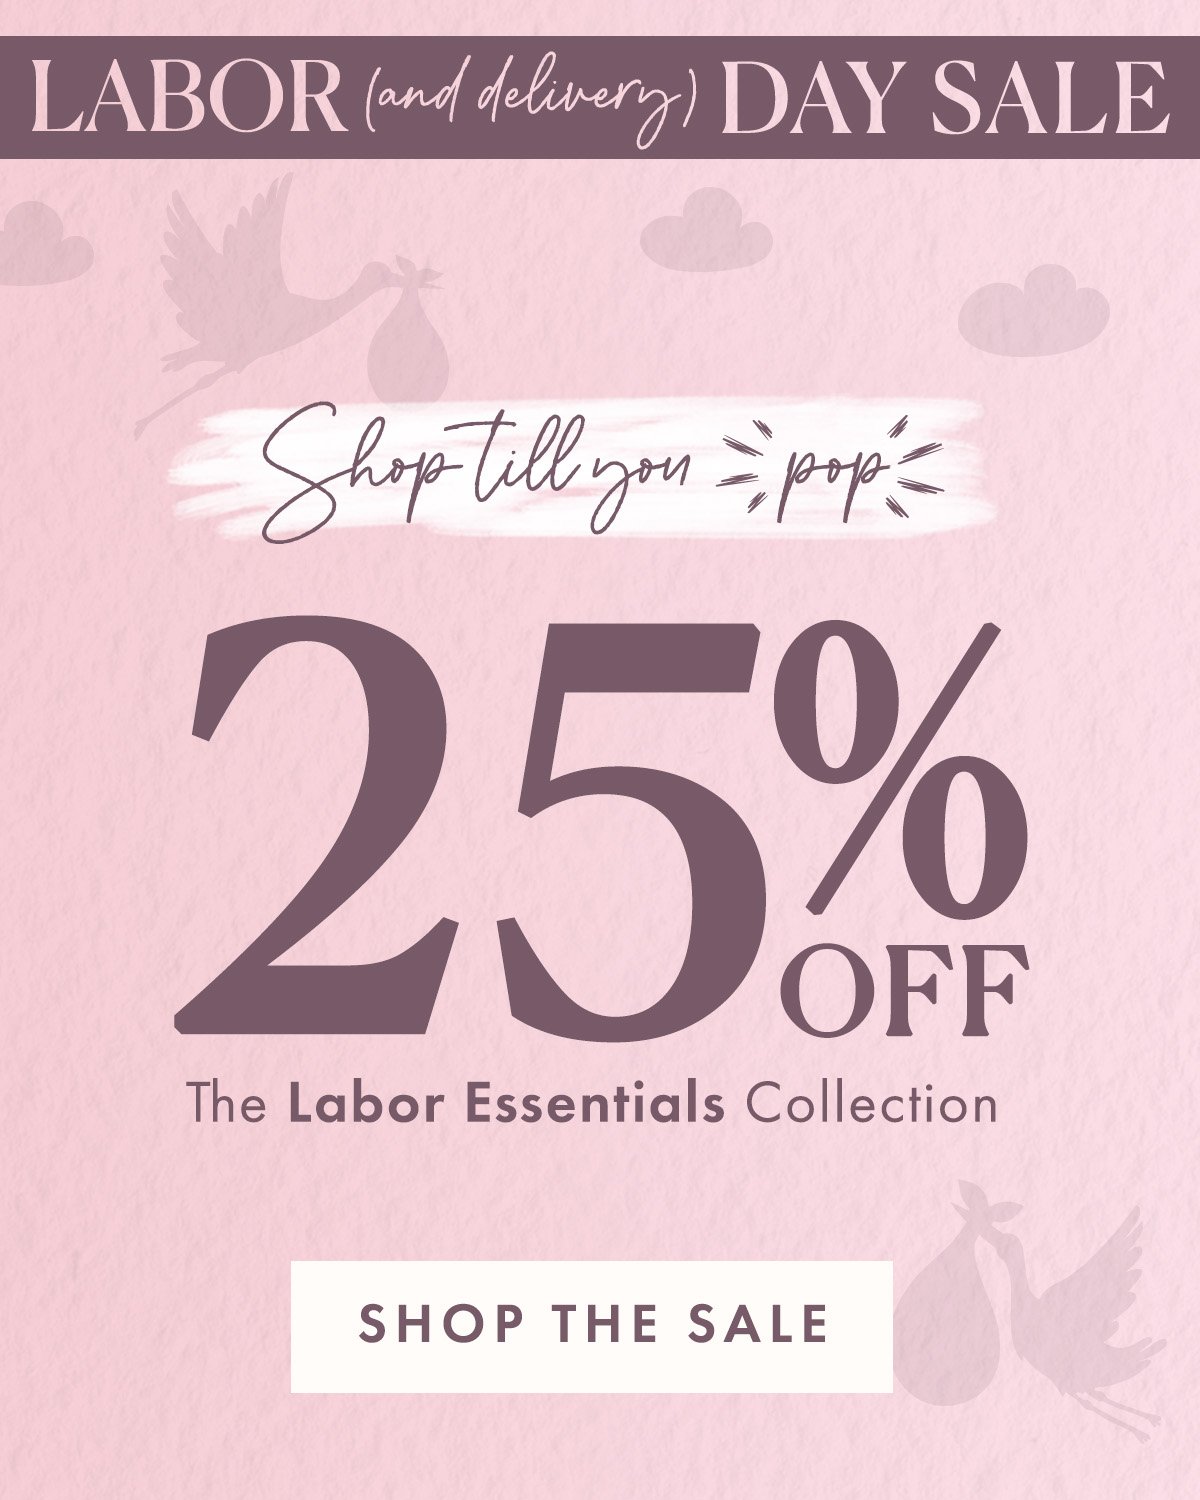 Labor (& Delivery) Day Sale: Get 25% off the Labor Essentials Collection